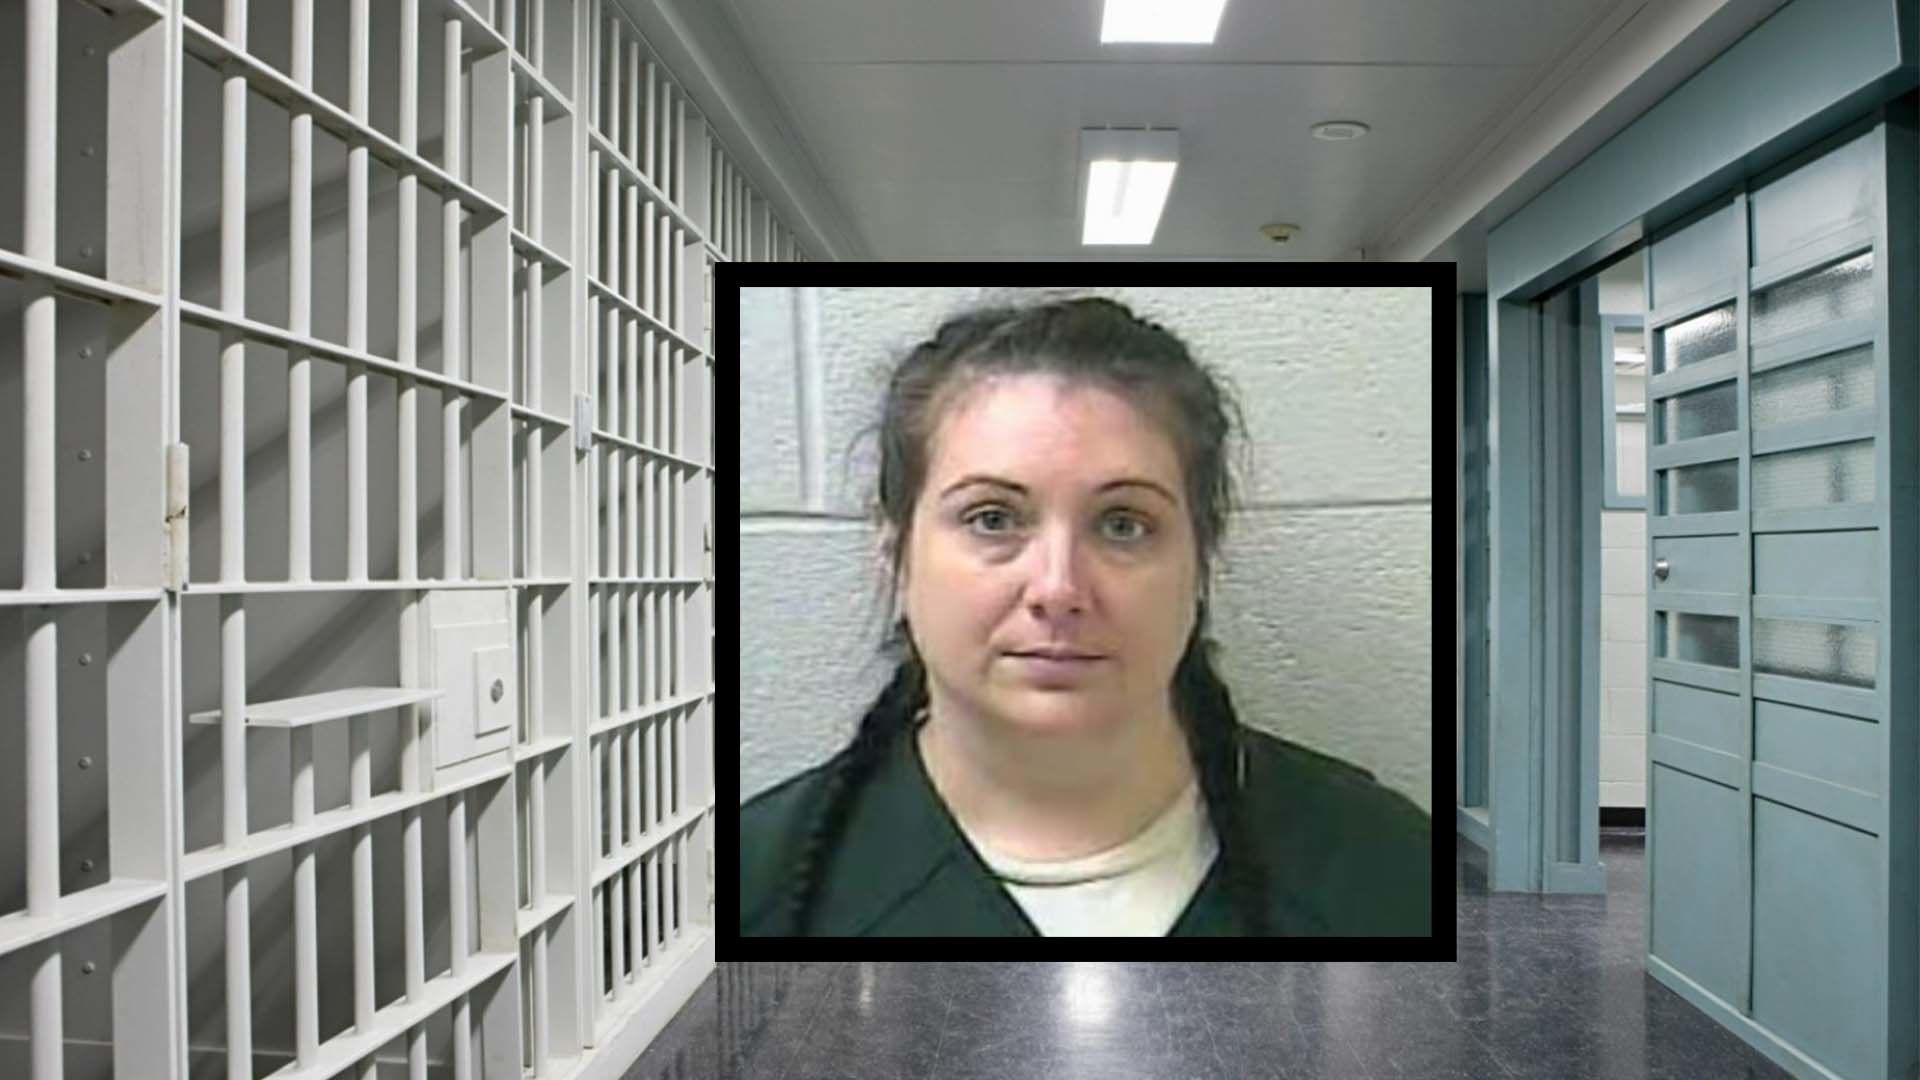 On Friday, July 15, in Nashville, US District Chief Judge Waverly D. Crenshaw Jr. sentenced Georgianna A.M. “GG” Giampietro to 66 months in prison for concealing material support and resources intended for a foreign terrorist organization. He also ordered her to undergo 15 years of supervised release when she exits incarceration. Composite by Coffee or Die Magazine.